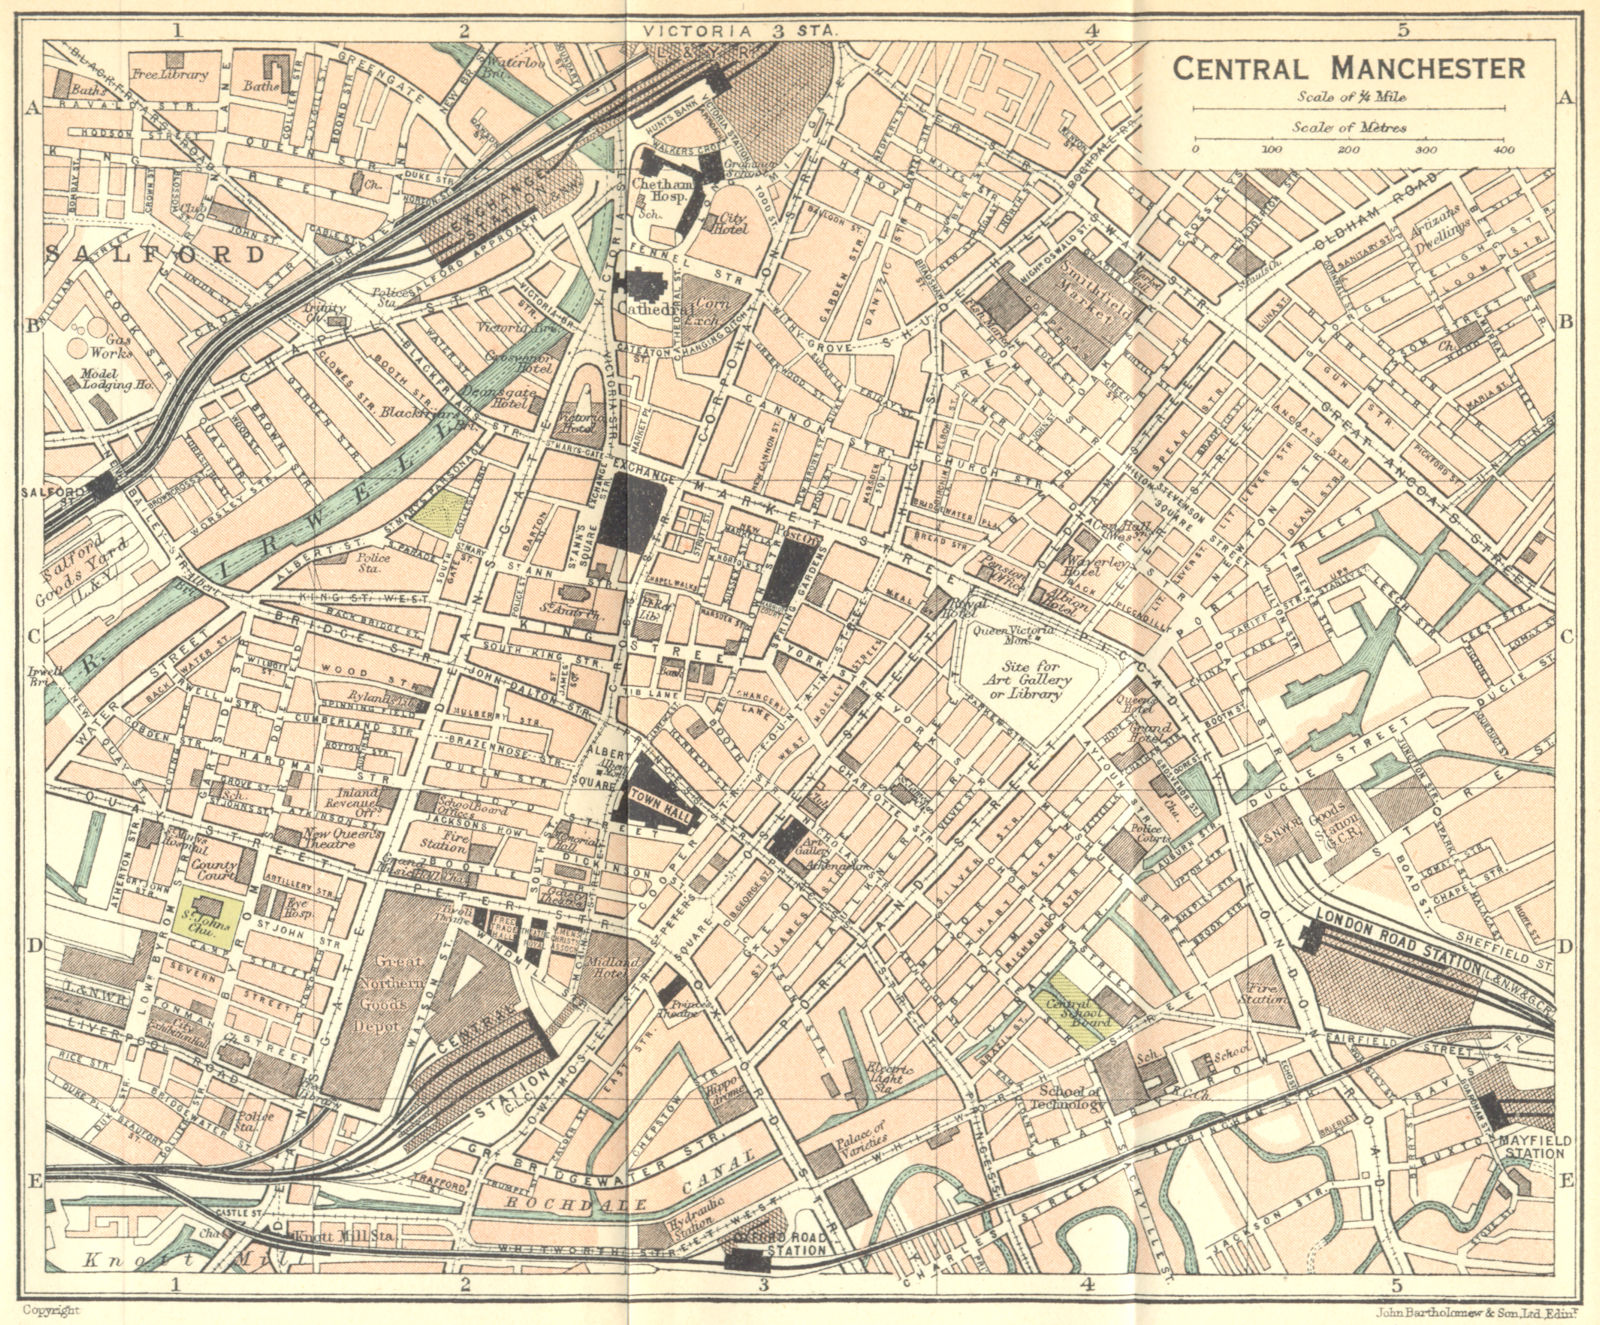 Associate Product LANCS. Central Manchester Town Plan 1924 old vintage map chart